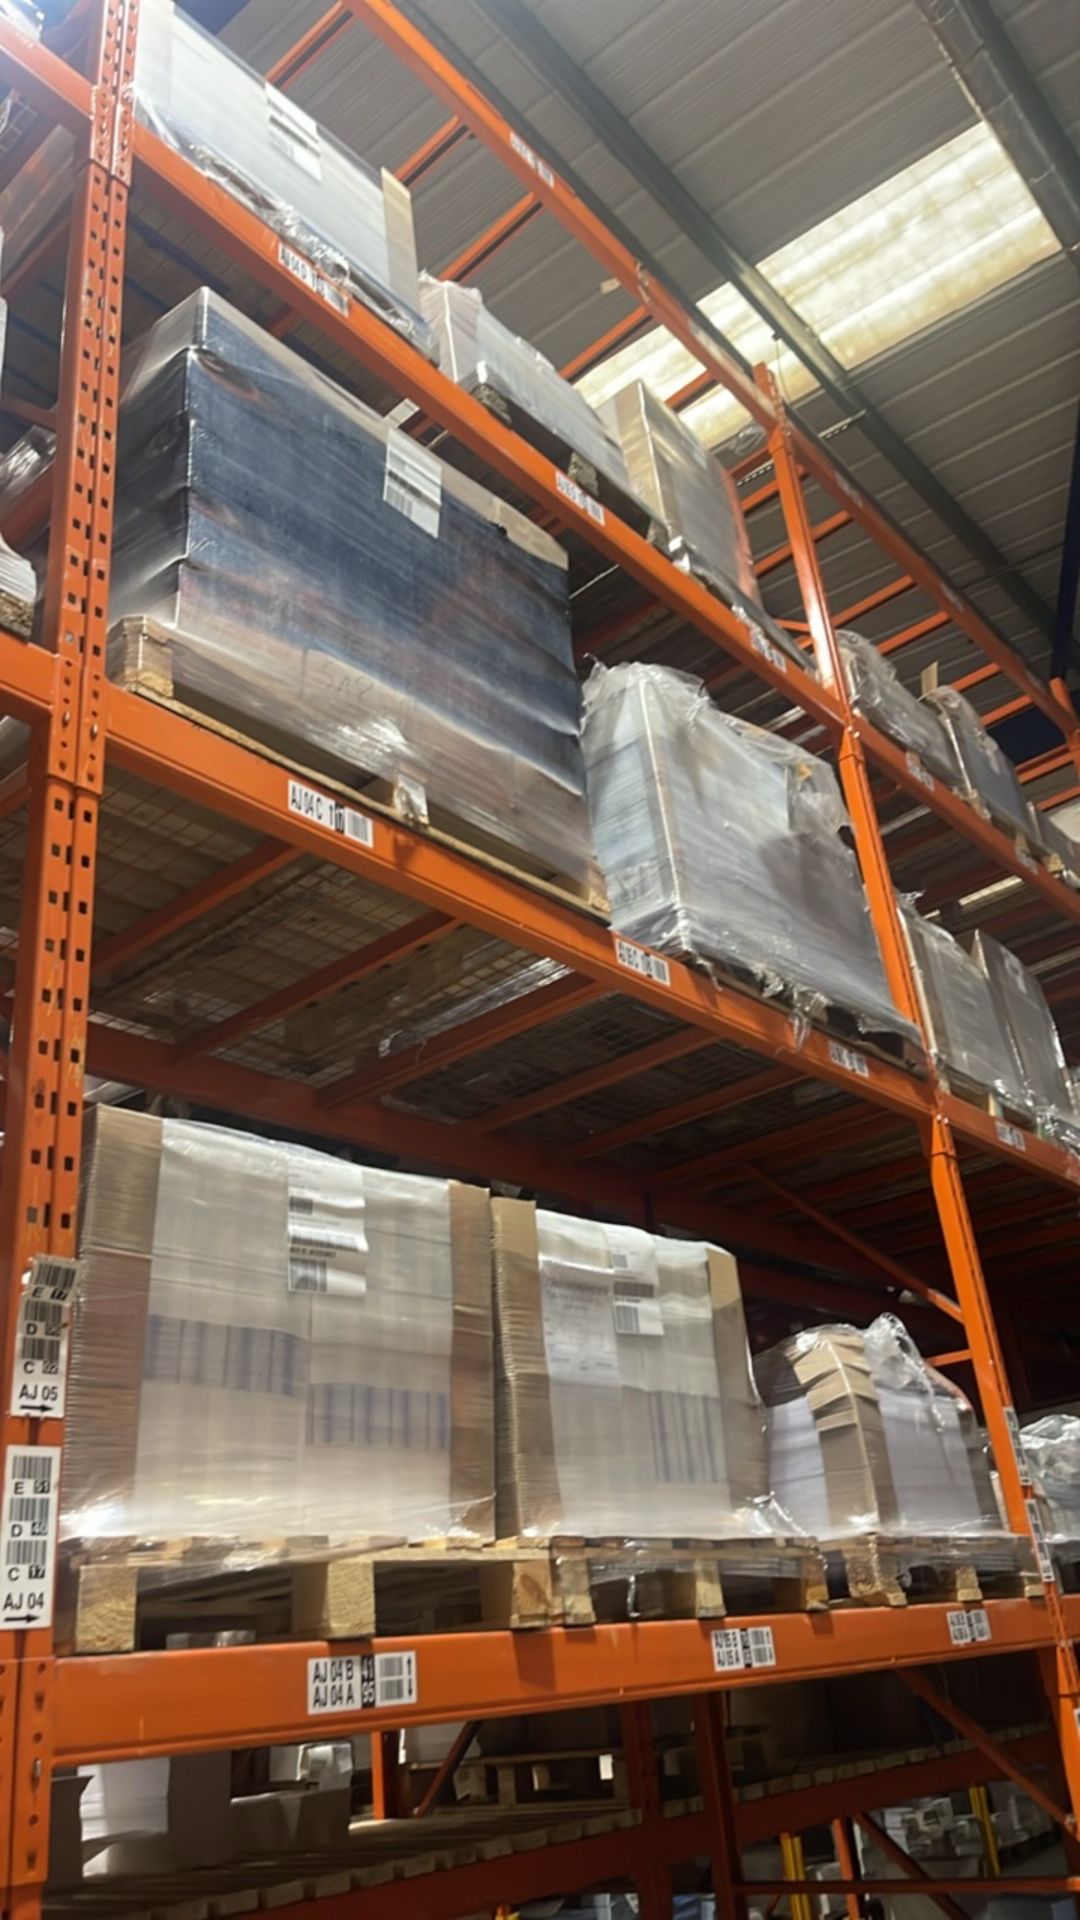 24 Bays Of Boltless Pallet Racking - Image 7 of 11